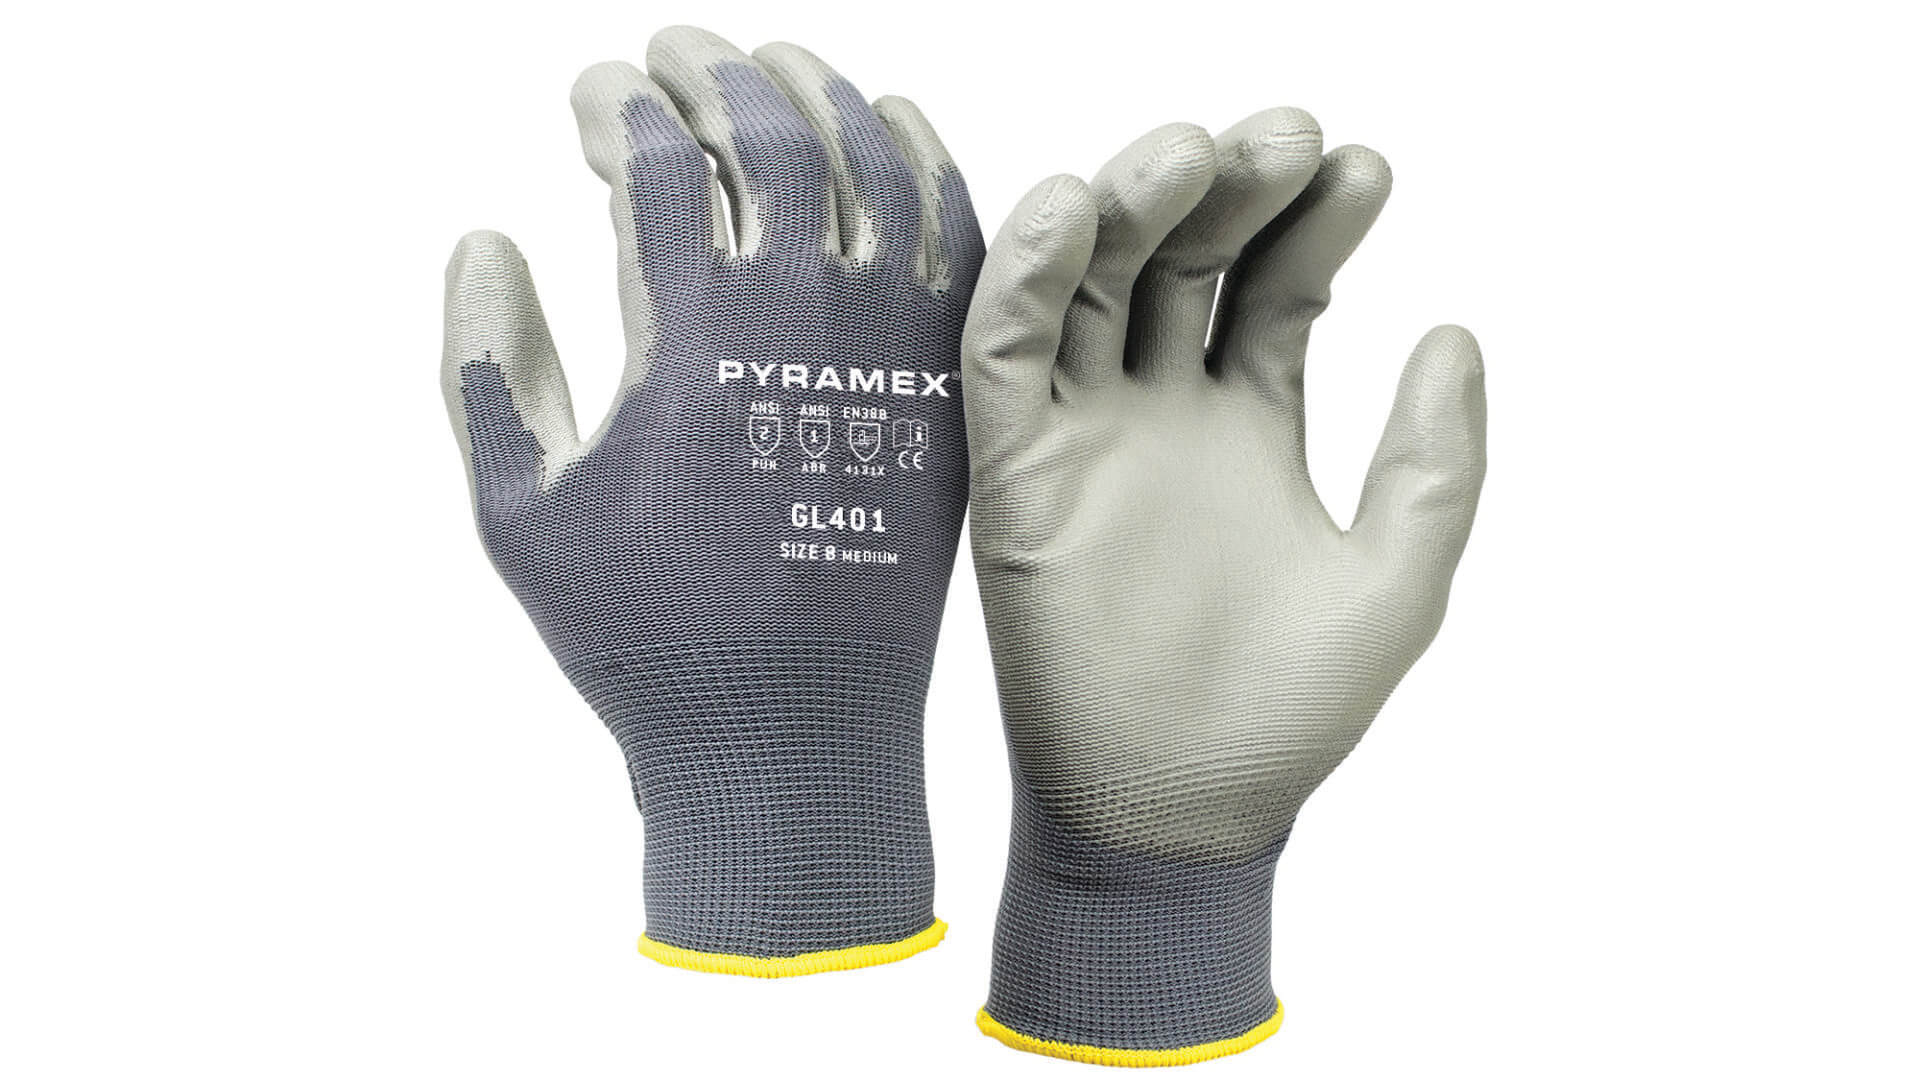 Pyramex Gloves in Blue and White Color